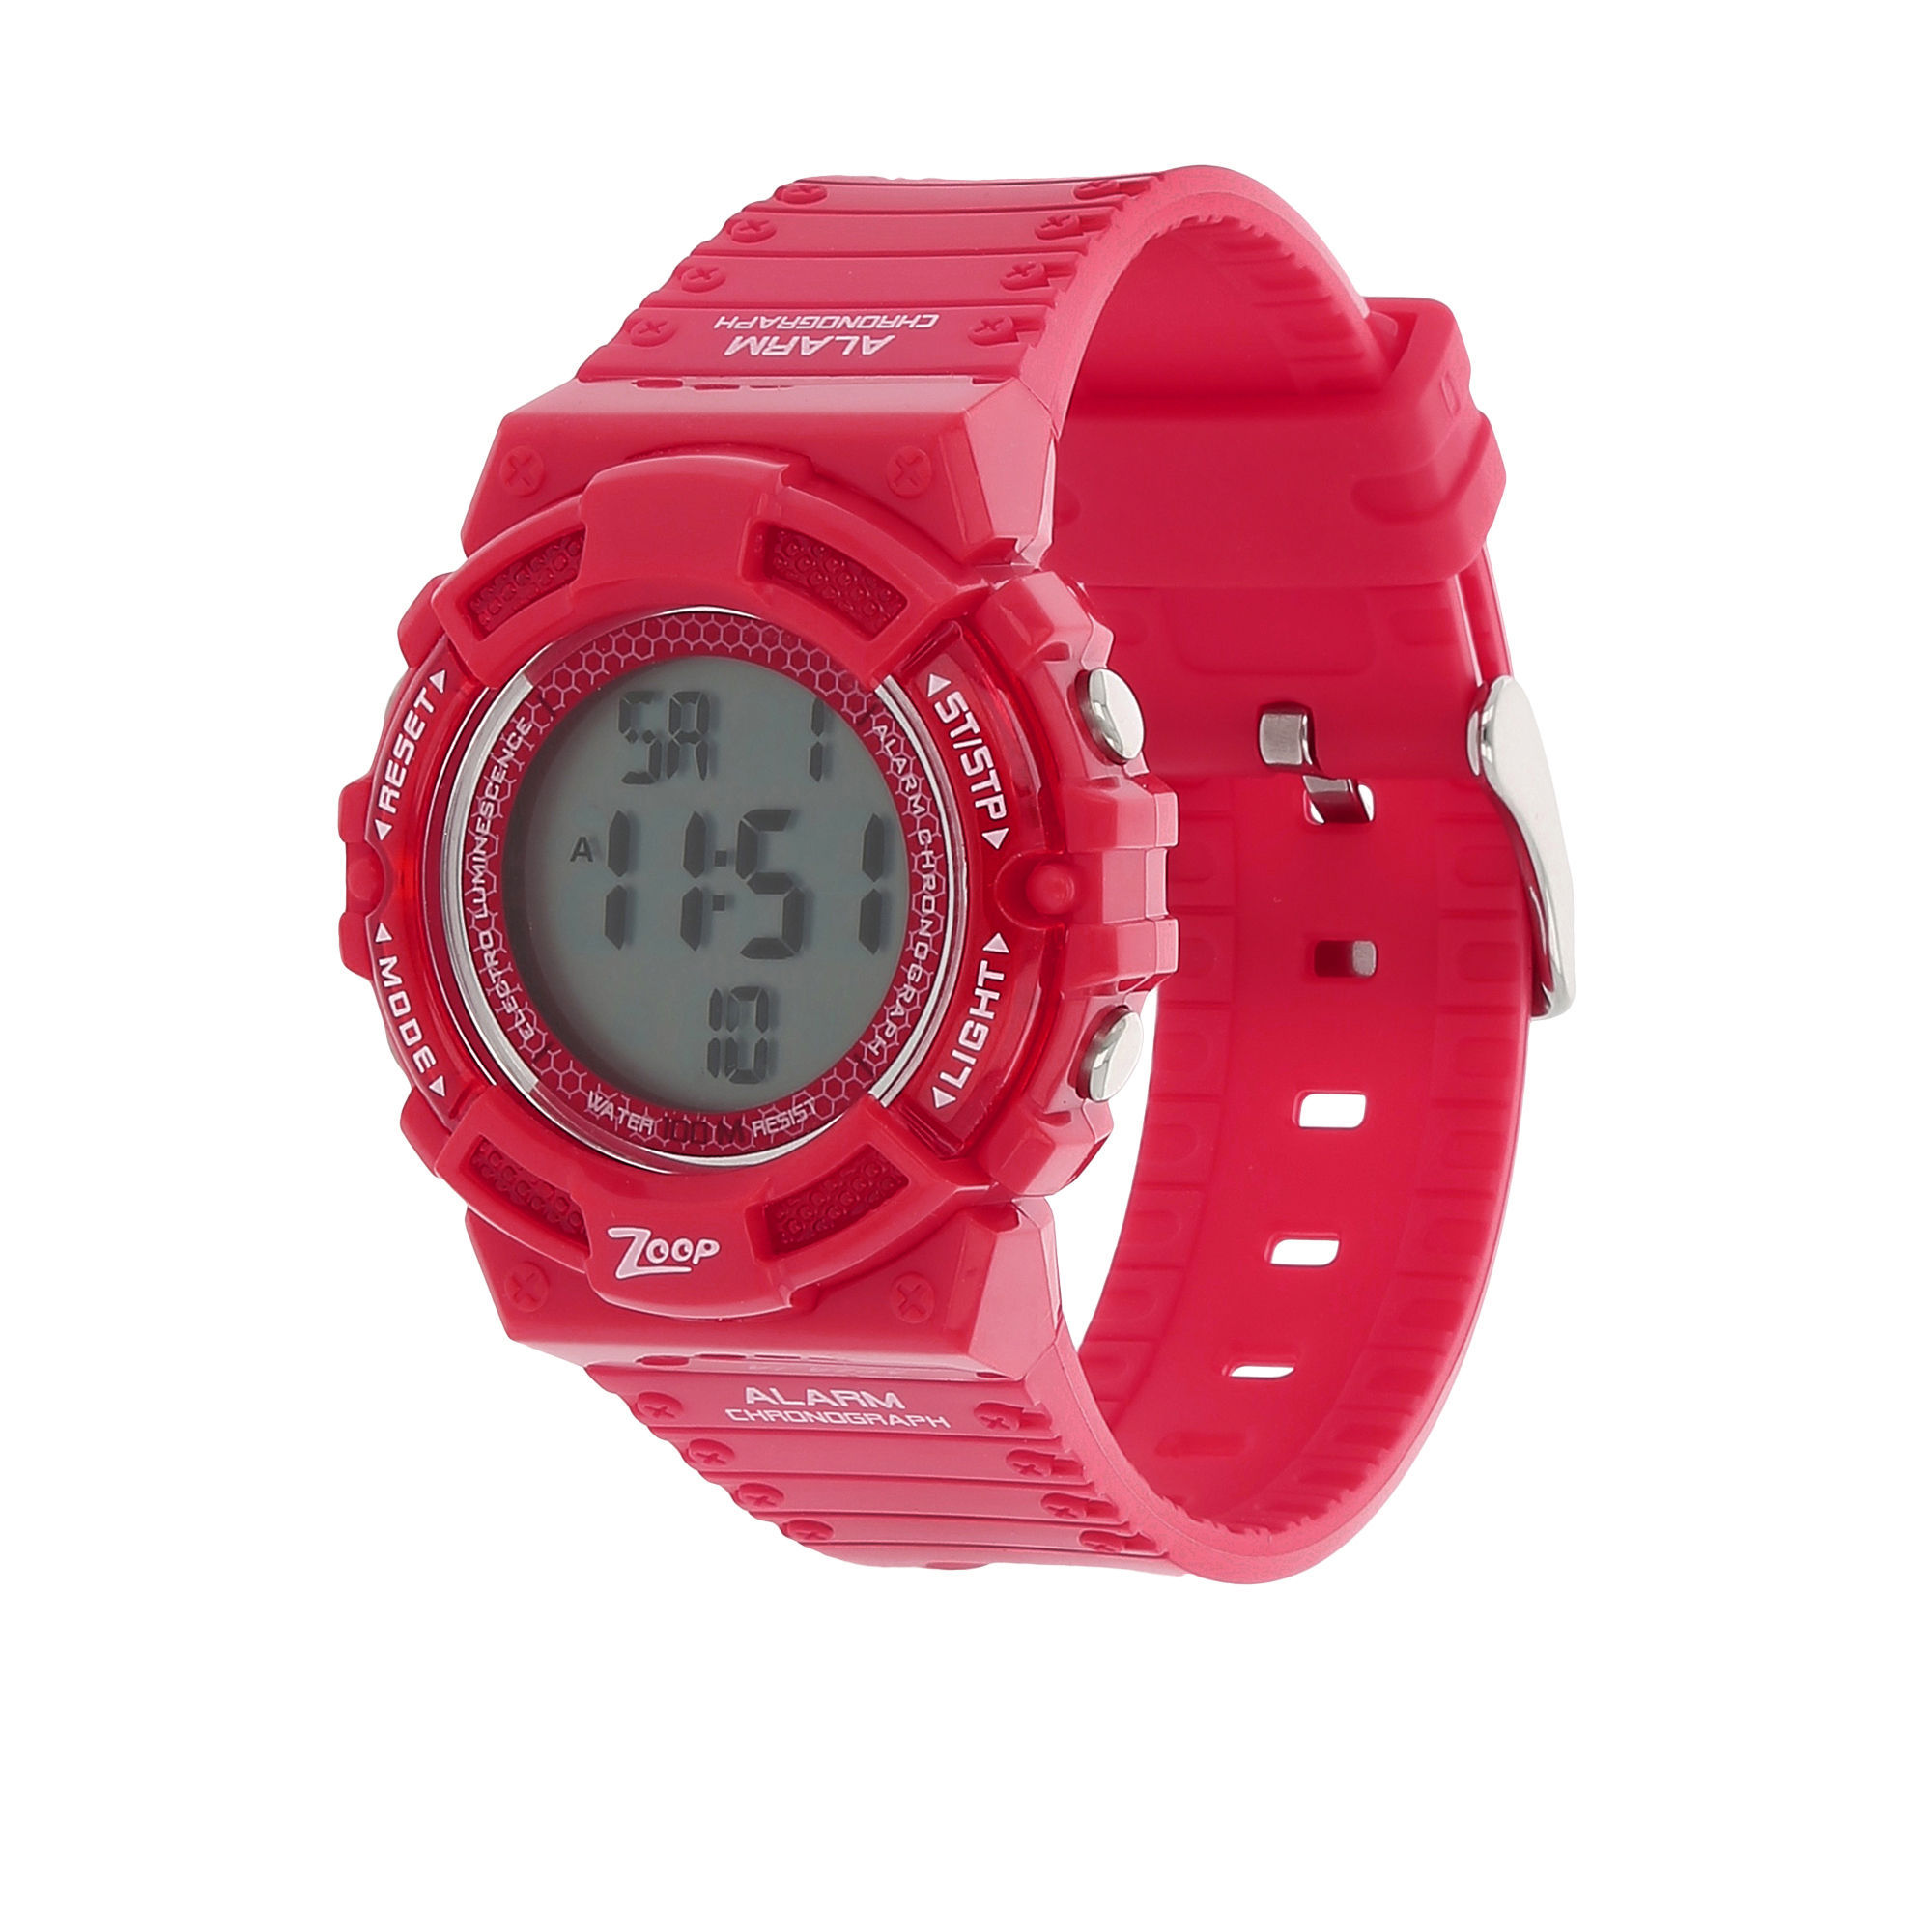 Zoop Grey Digital Watch with Red Plastic Strap